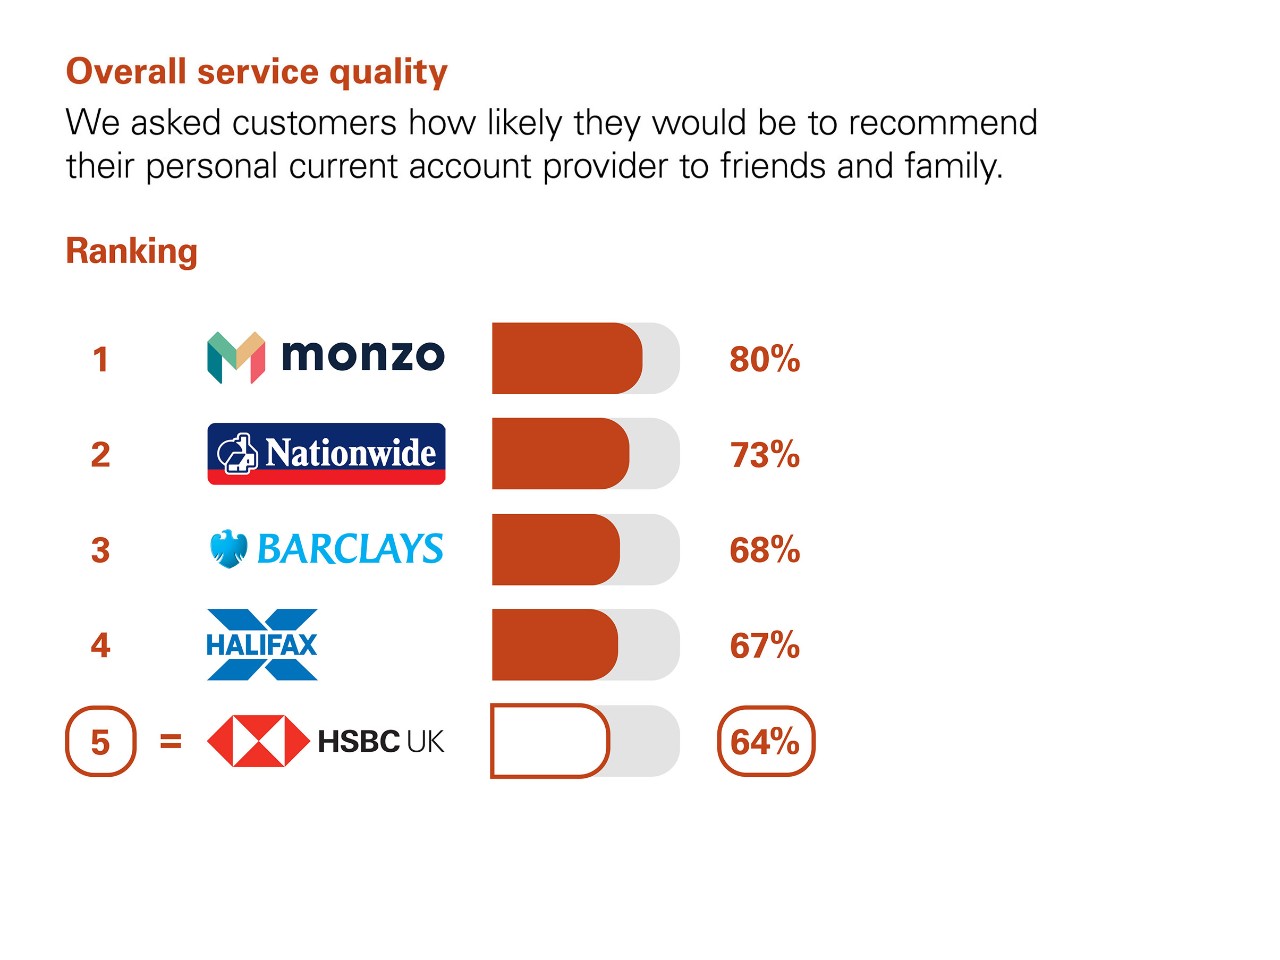 Overall Service Quality. We asked customers how likely they would be to recommend their personal current account provider to friends and family. Ranking: 1 Monzo 75% 2 Nationwide 73% 3 Barclays 68%. 4 Halifax 67%. Equal 5 HSBC UK 64%.